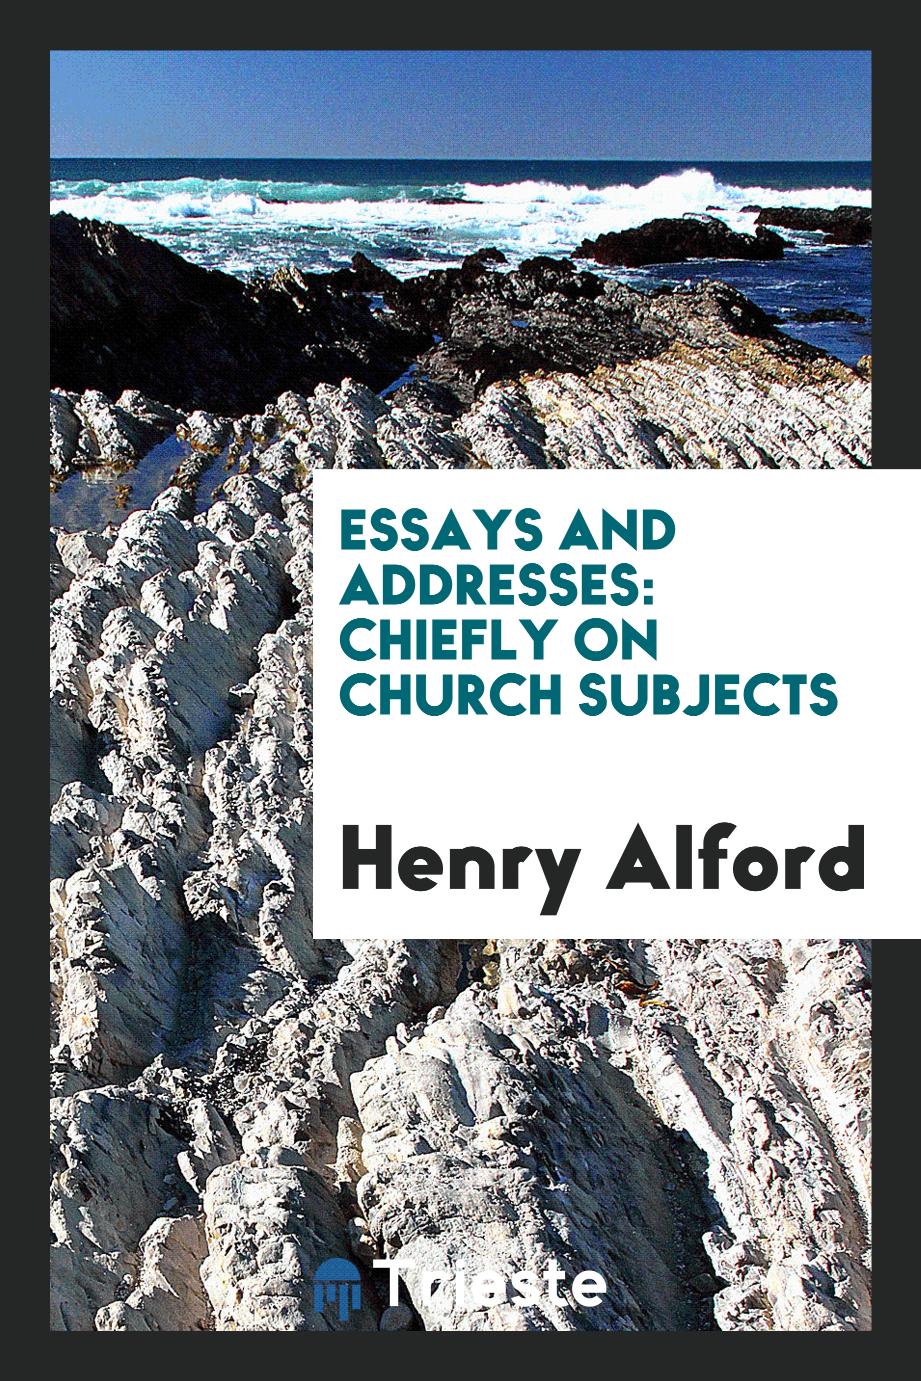 Essays and addresses: chiefly on church subjects